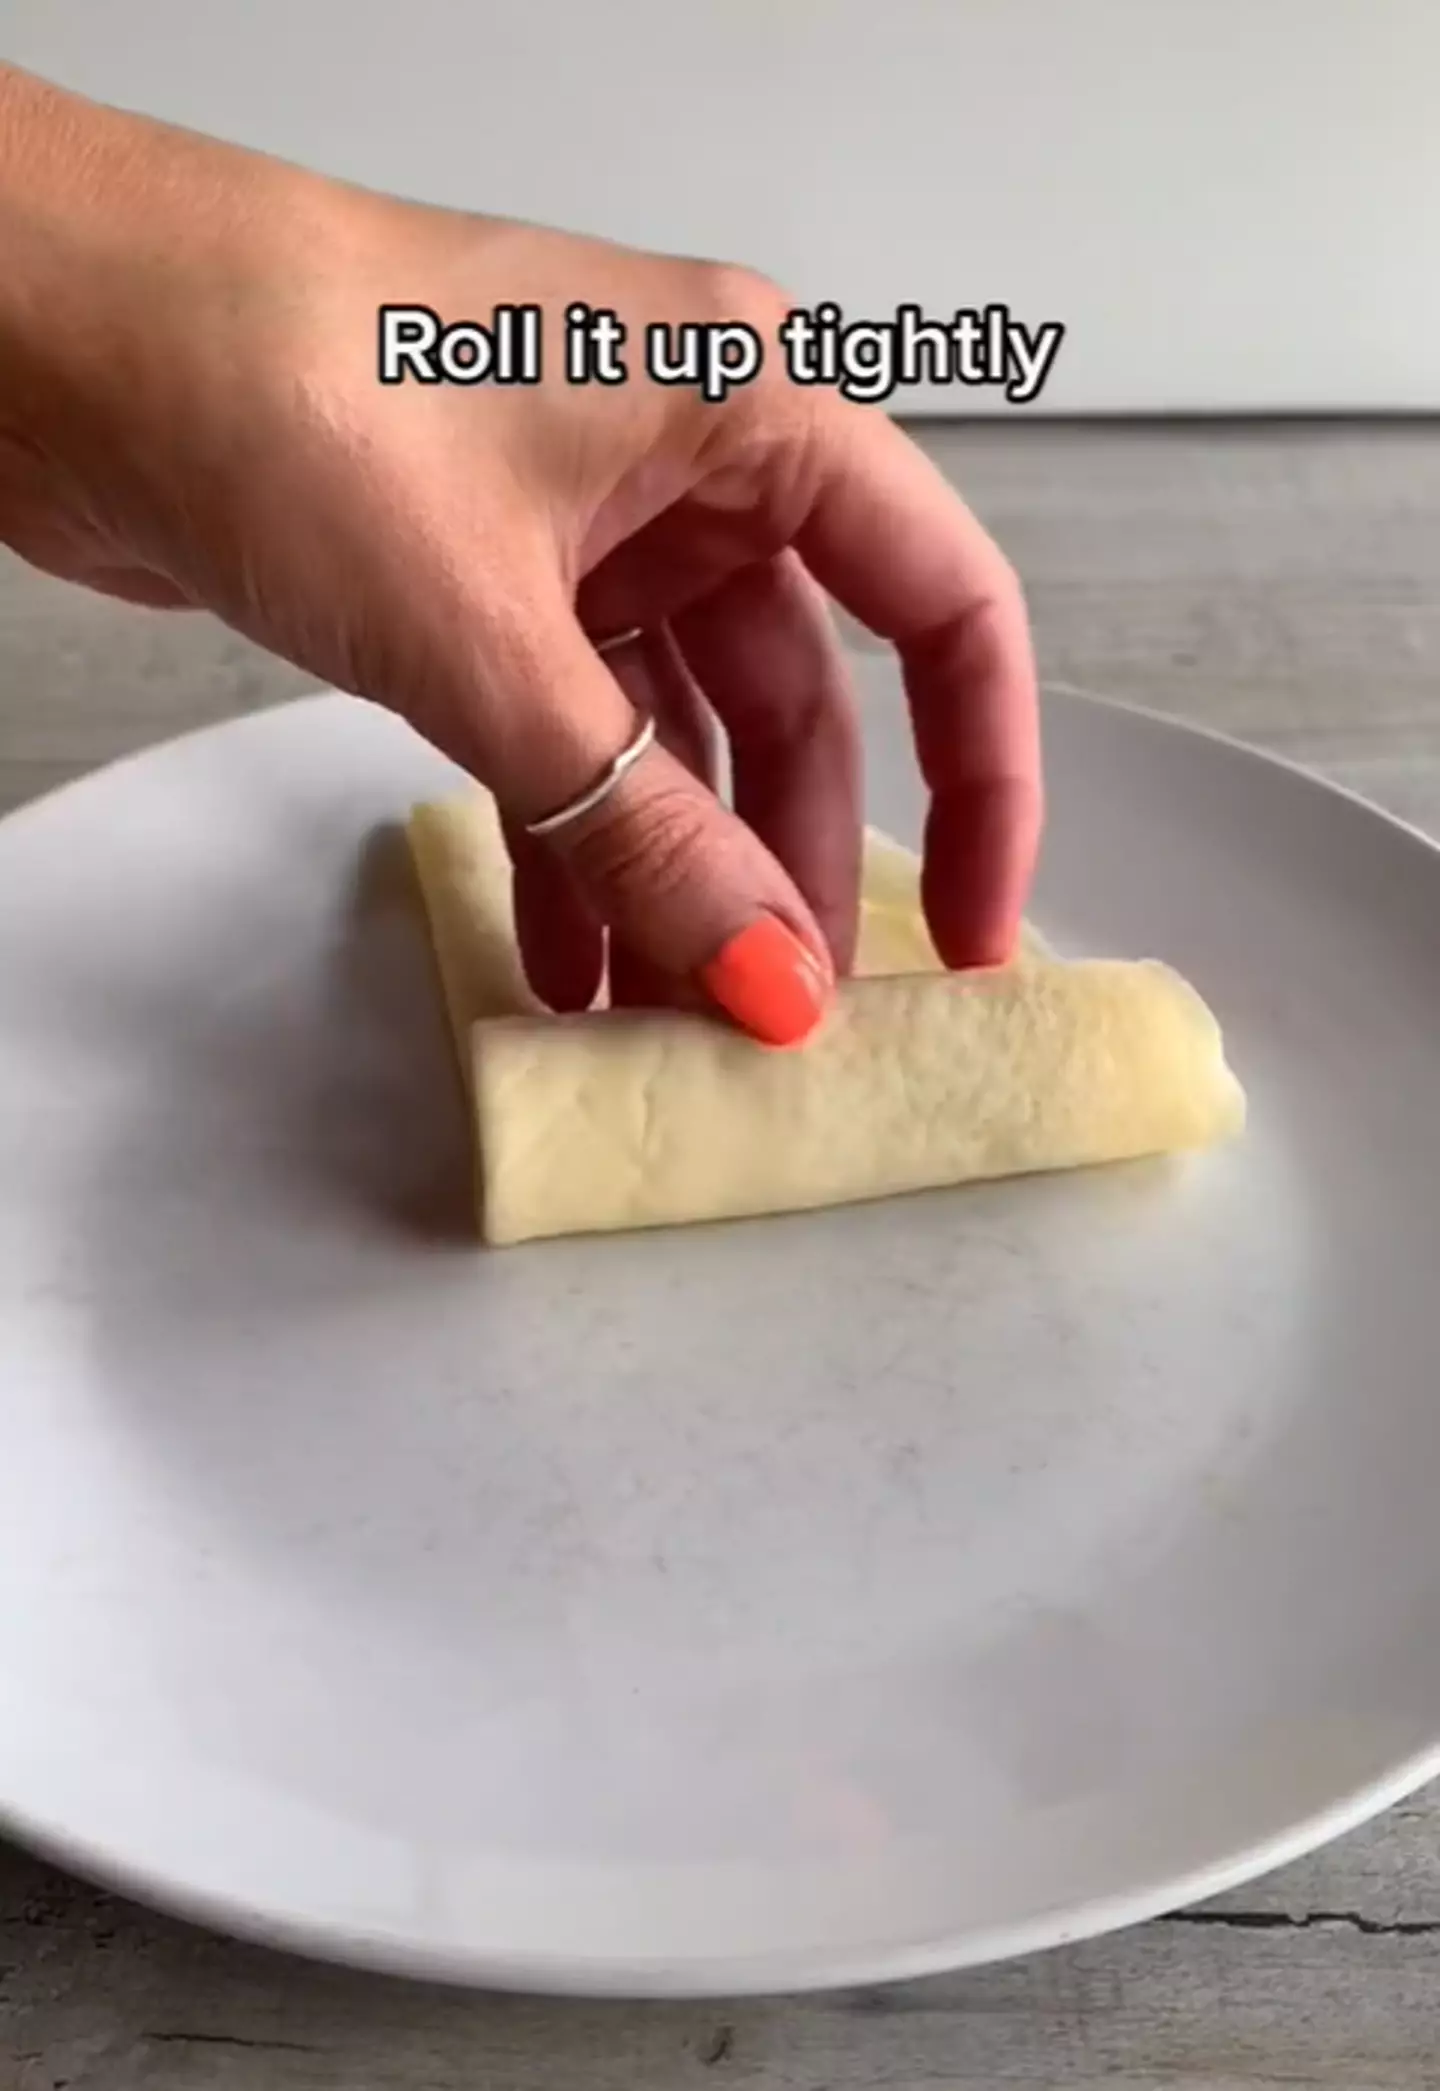 These Kinder Crepe Rolls are super easy to make (